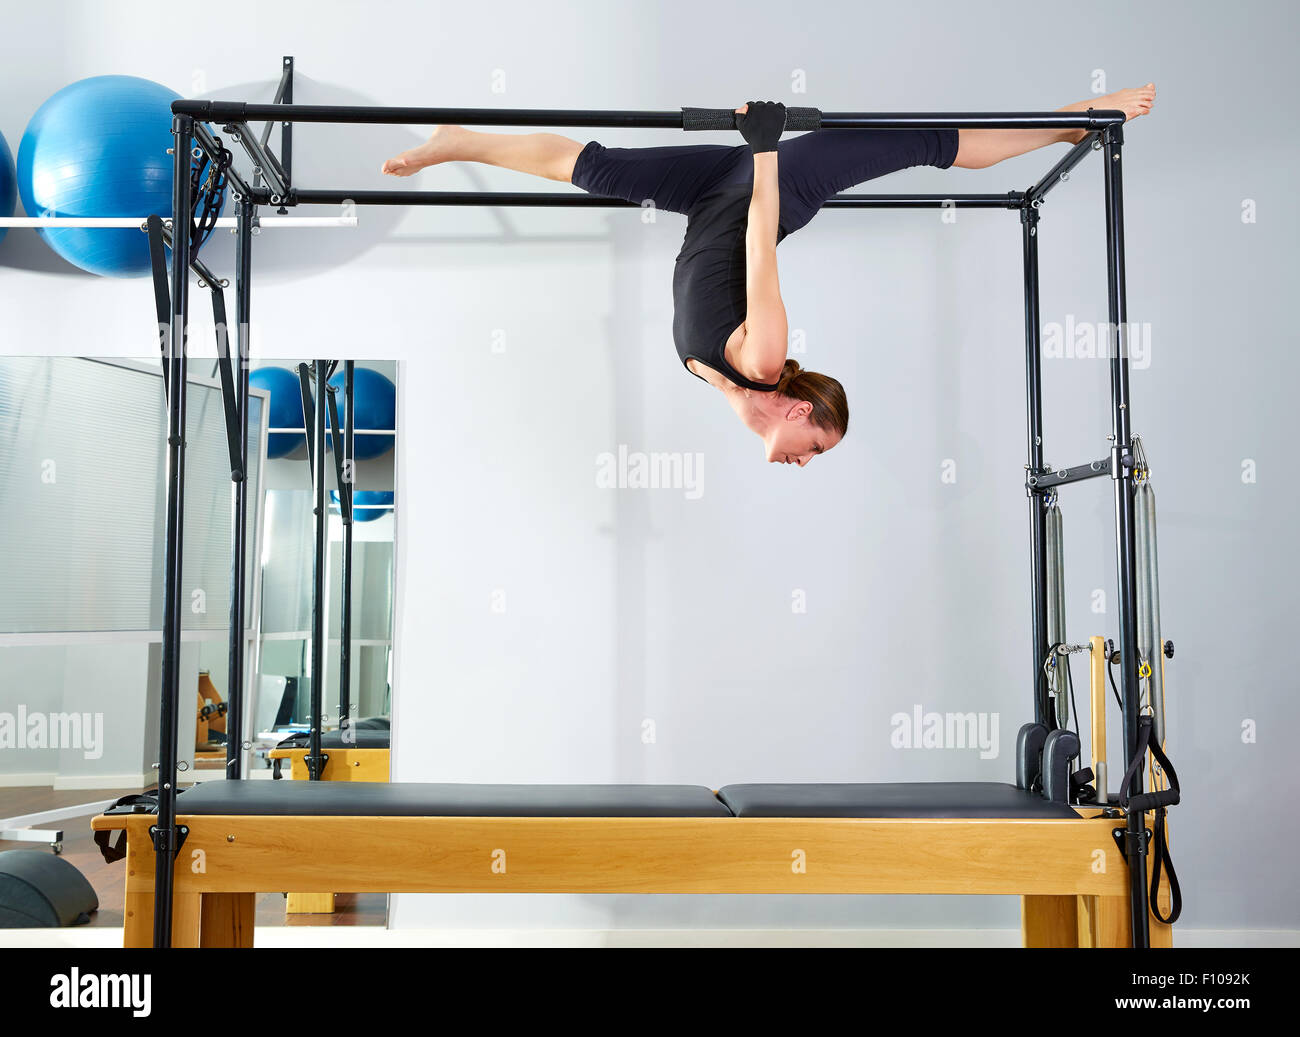 Pilates woman in cadillac walk over reformer upside down exercise at gym  Stock Photo - Alamy